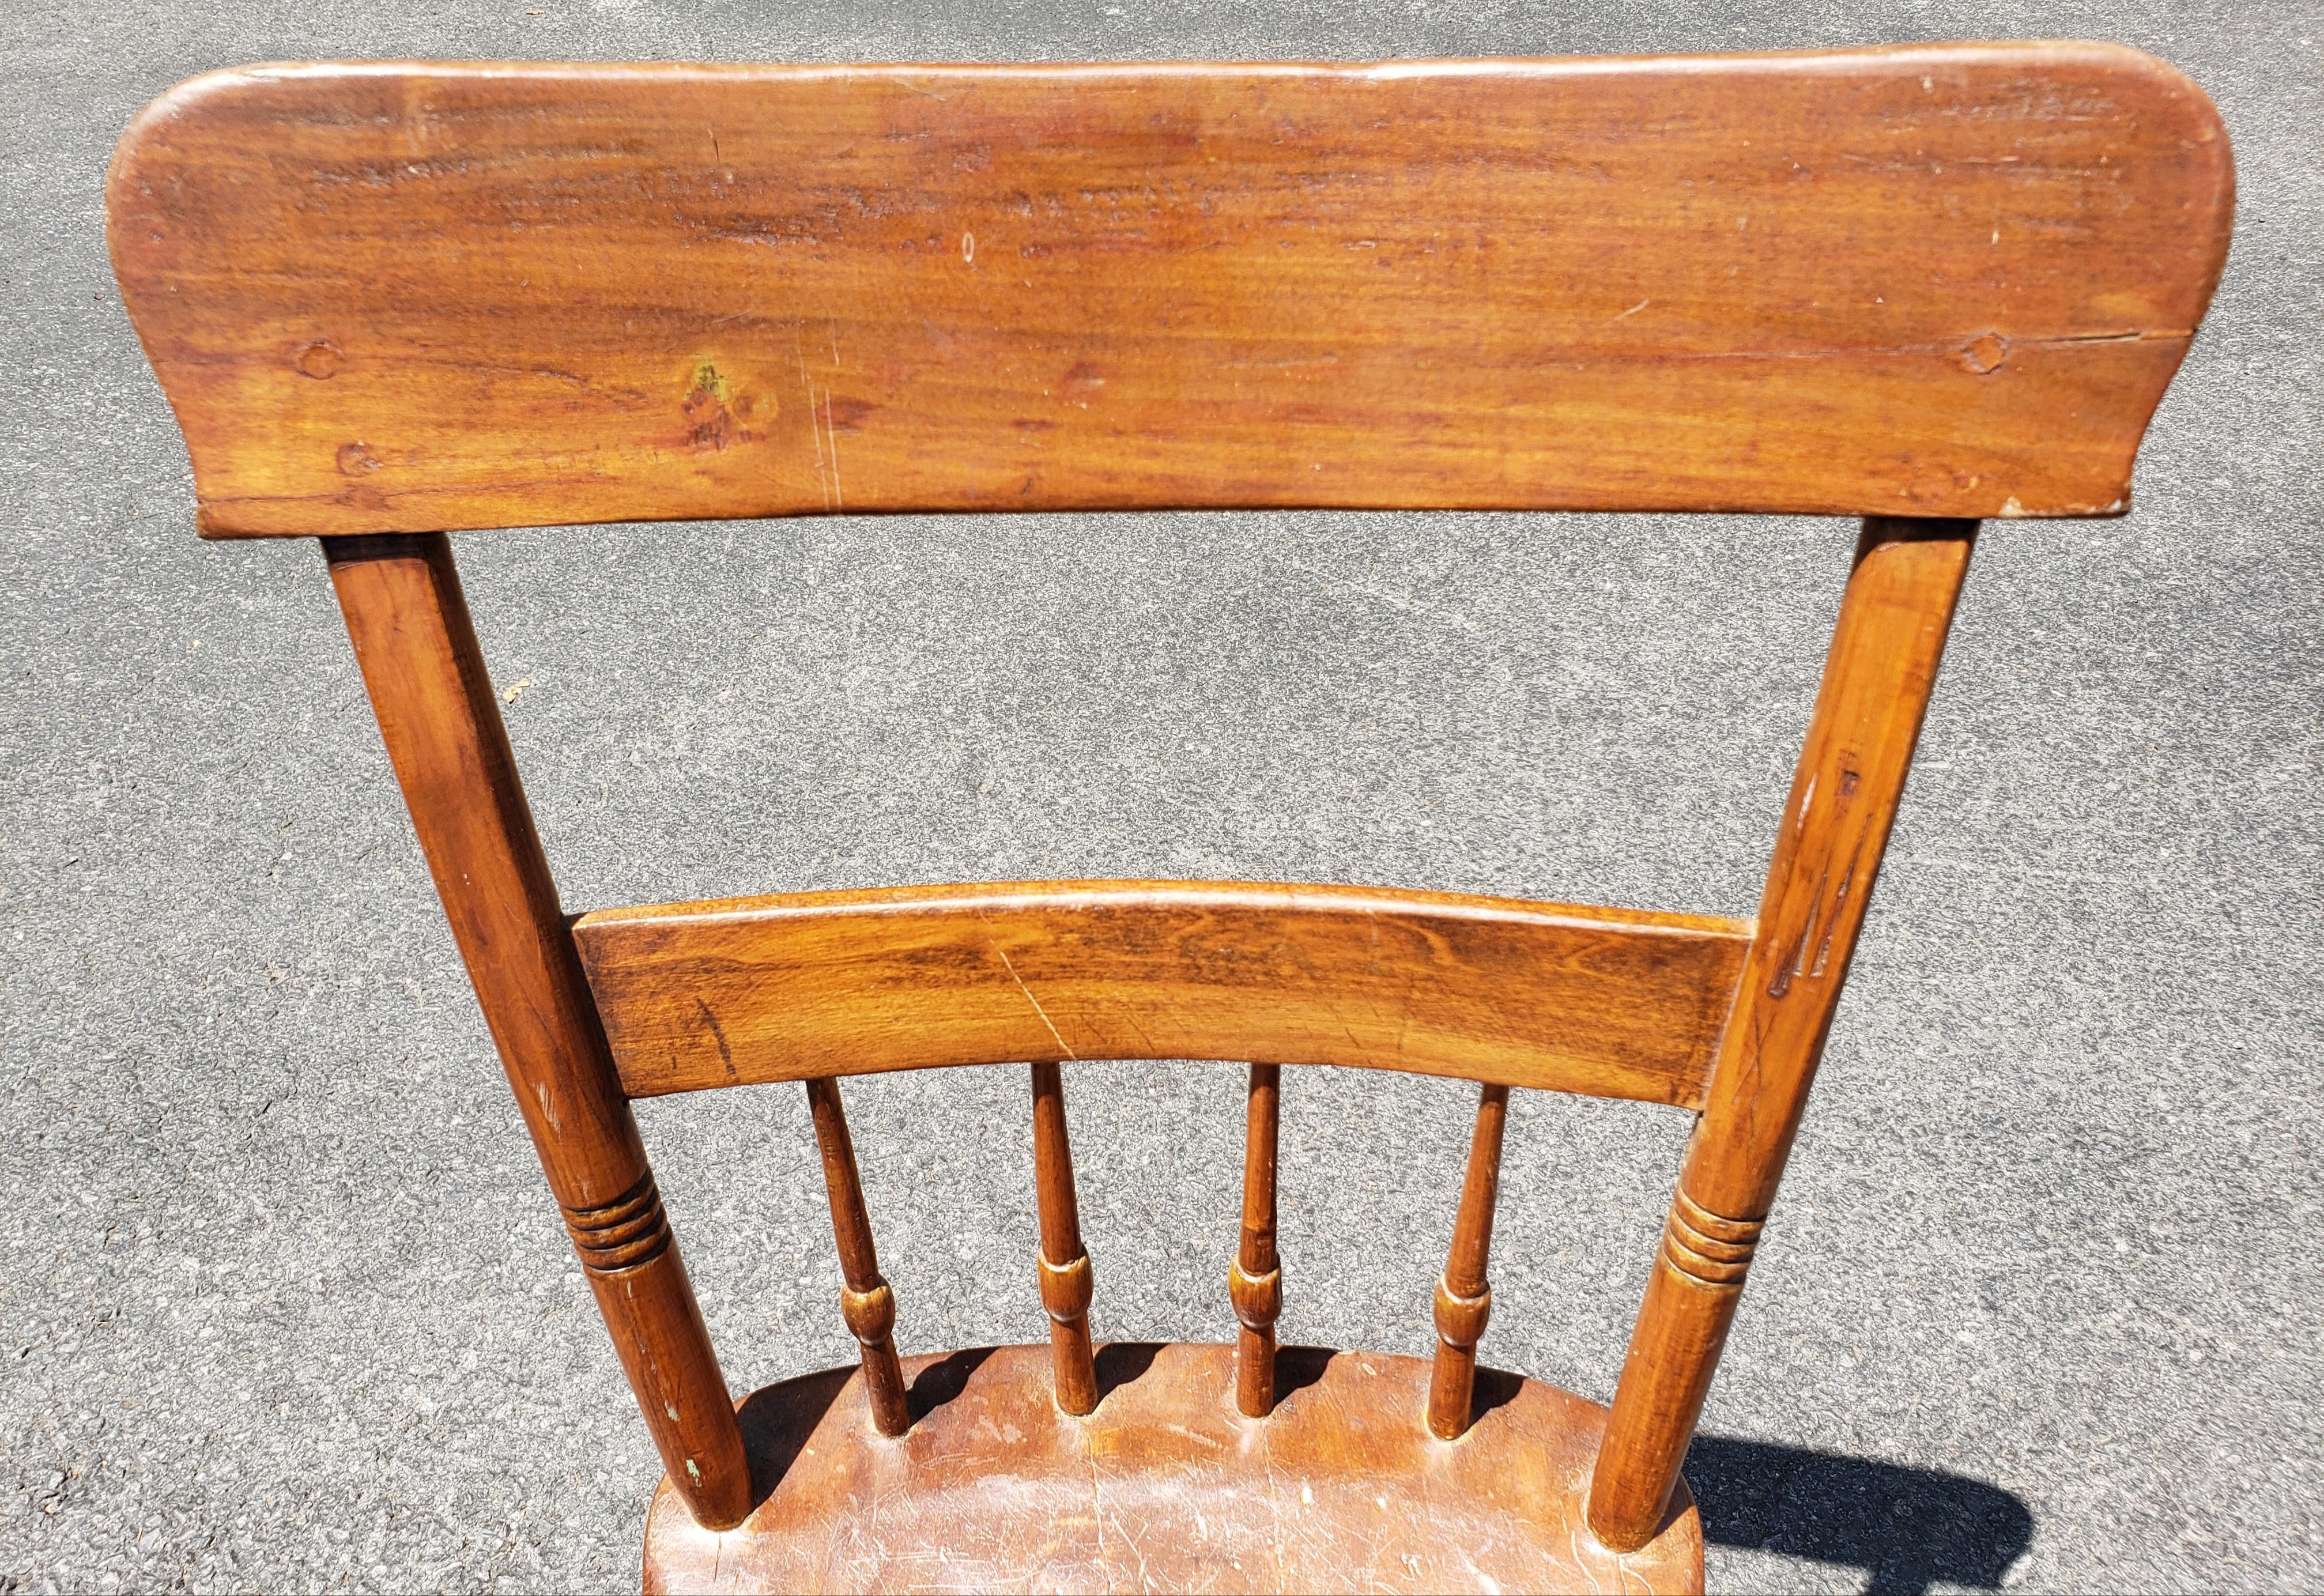 Late 19th Century Early American  HandCrafted Maple Plank Chair In Good Condition For Sale In Germantown, MD